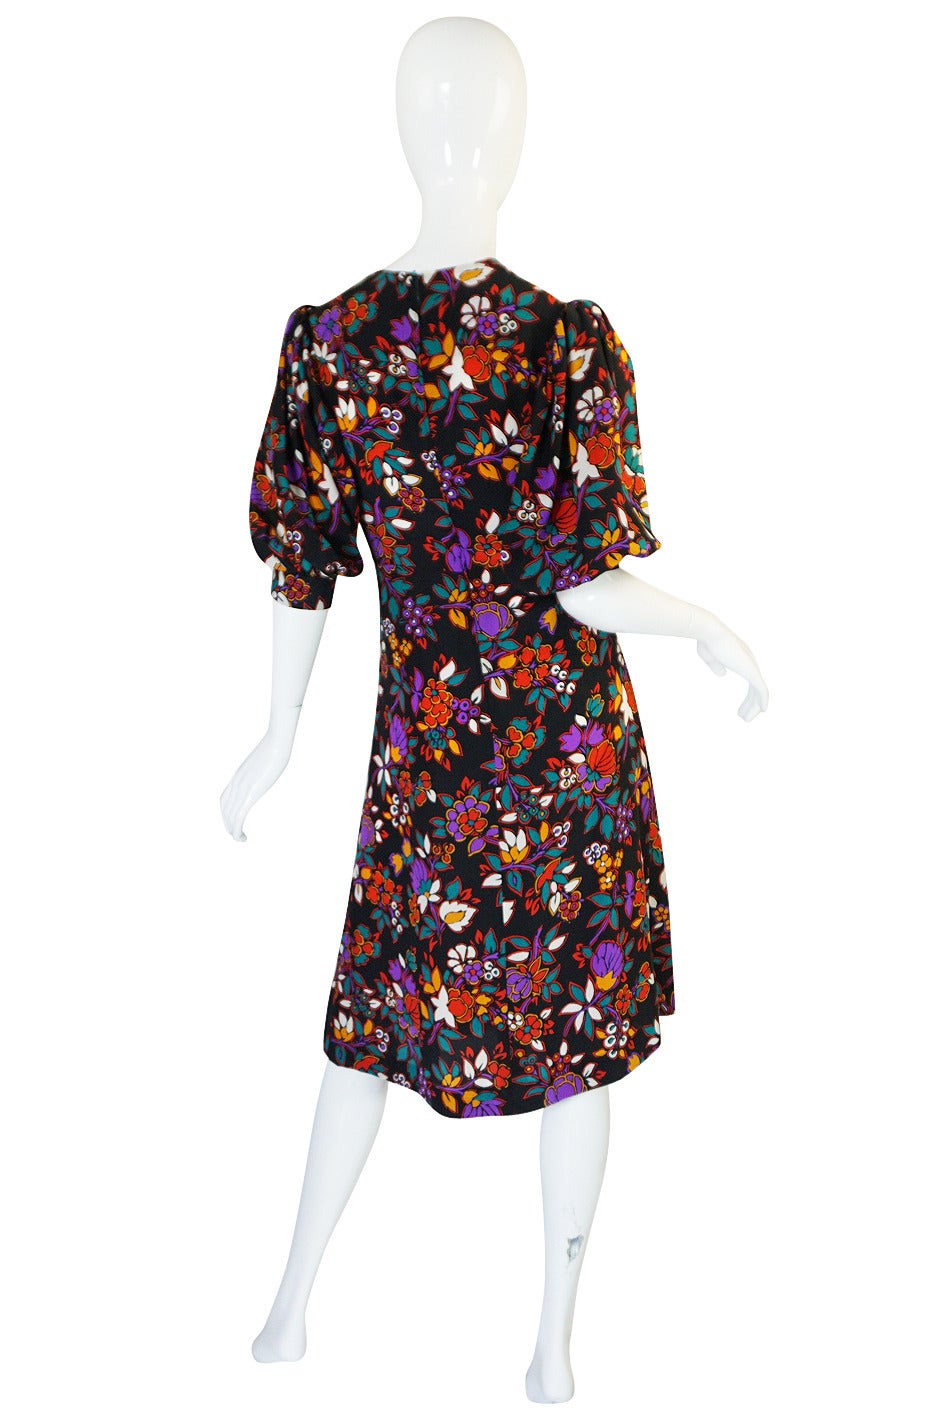 Florals and Yves Saint Laurent were always the perfect combination and in this darling little silk fine light silk dress that is shown to its best! Over a black back drop are a riot of multi-colored, bright and bold flowers strewn over its surface.